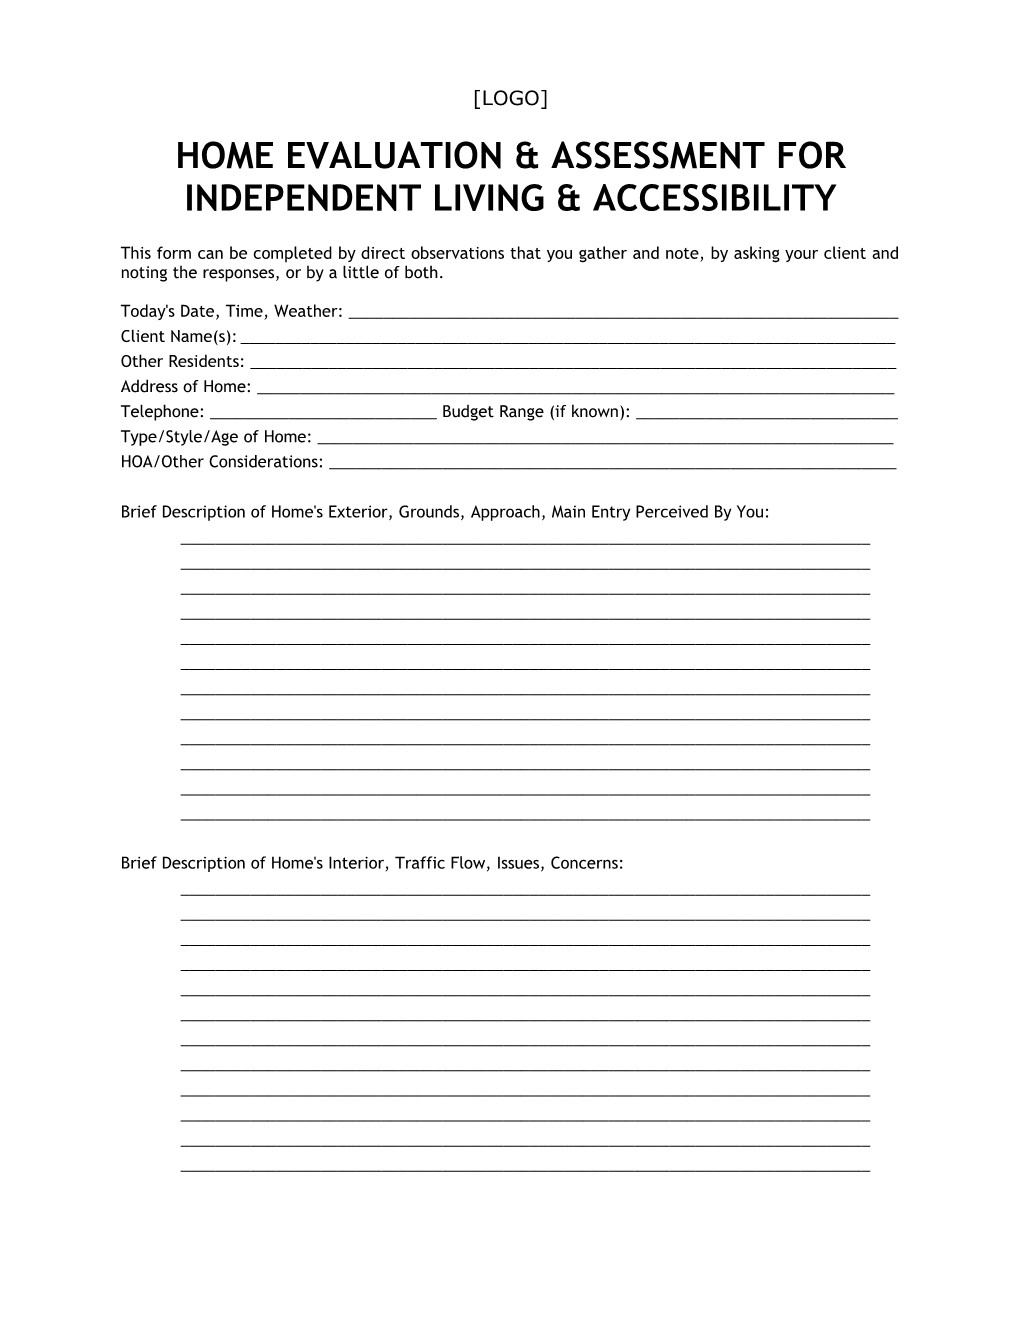 Home Evaluation & Assessment for Independent Living & Accessibility